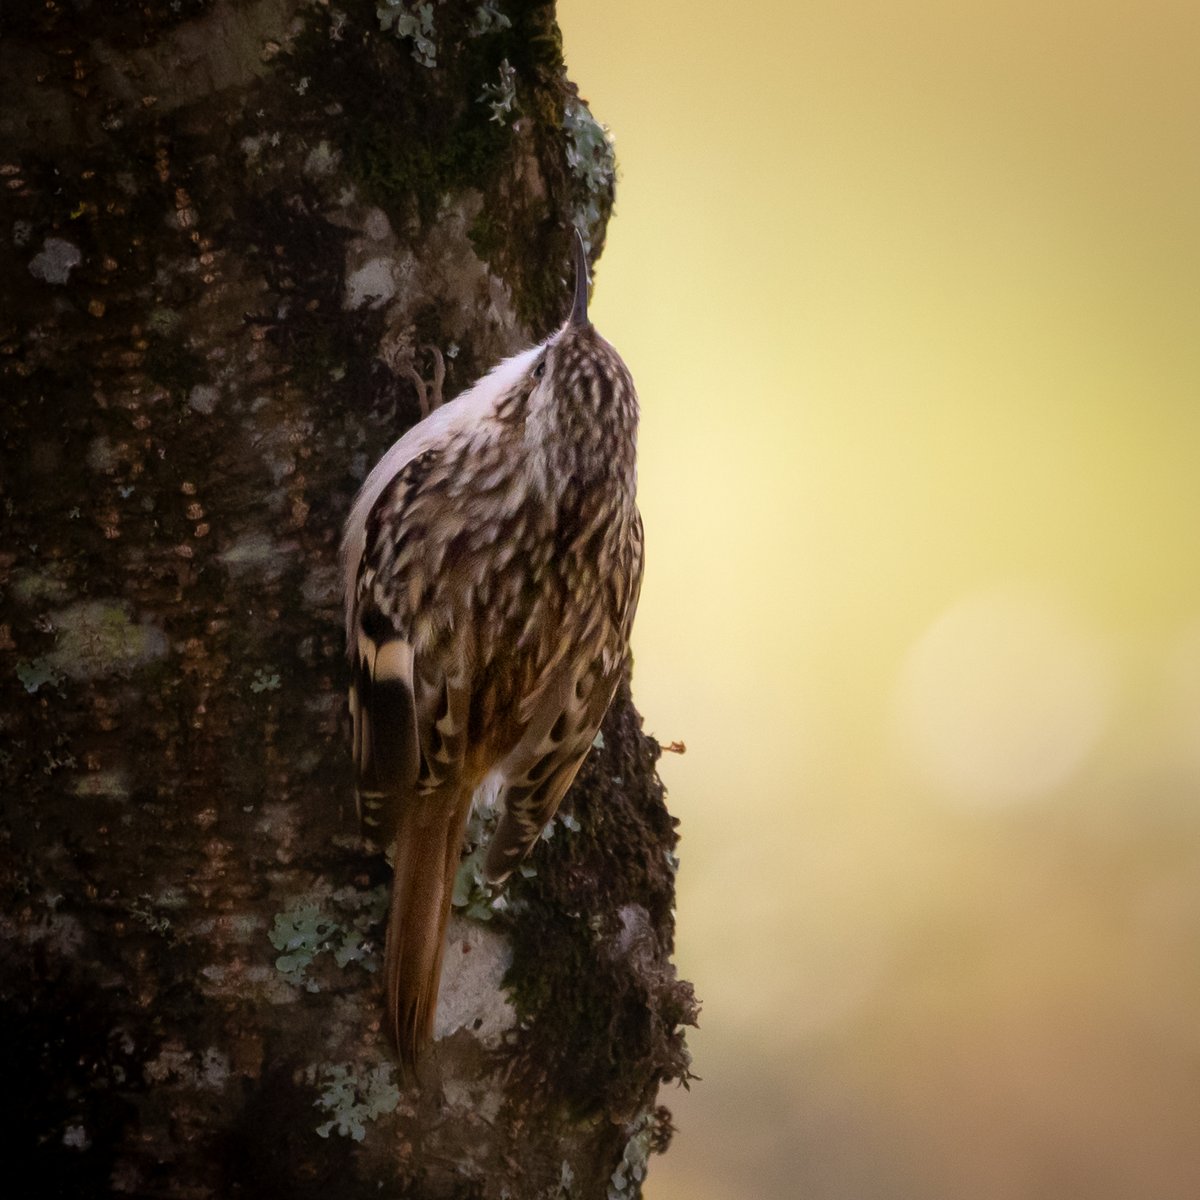 Good morning all. I'm rounding the year off with a little Treecreeper. Once again, I would like to thank everyone for their support during 2023 and wish you all a happy, safe and prosperous New Year. #TwitterNatureCommunity #NaturePhotography #nature #naturelovers